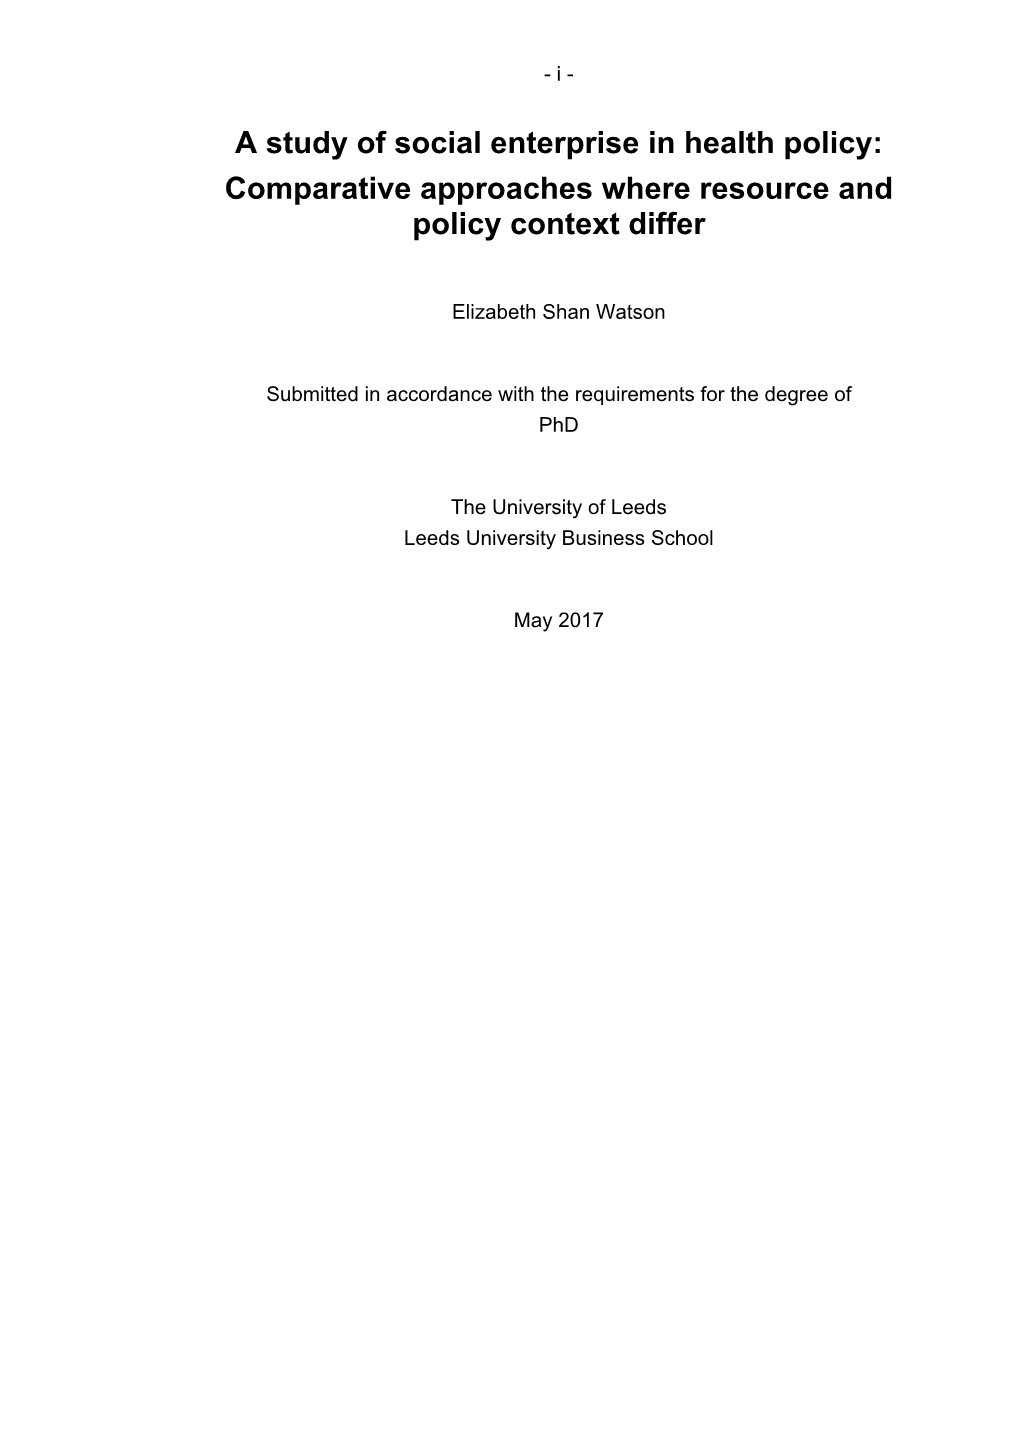 A Study of Social Enterprise in Health Policy: Comparative Approaches Where Resource and Policy Context Differ